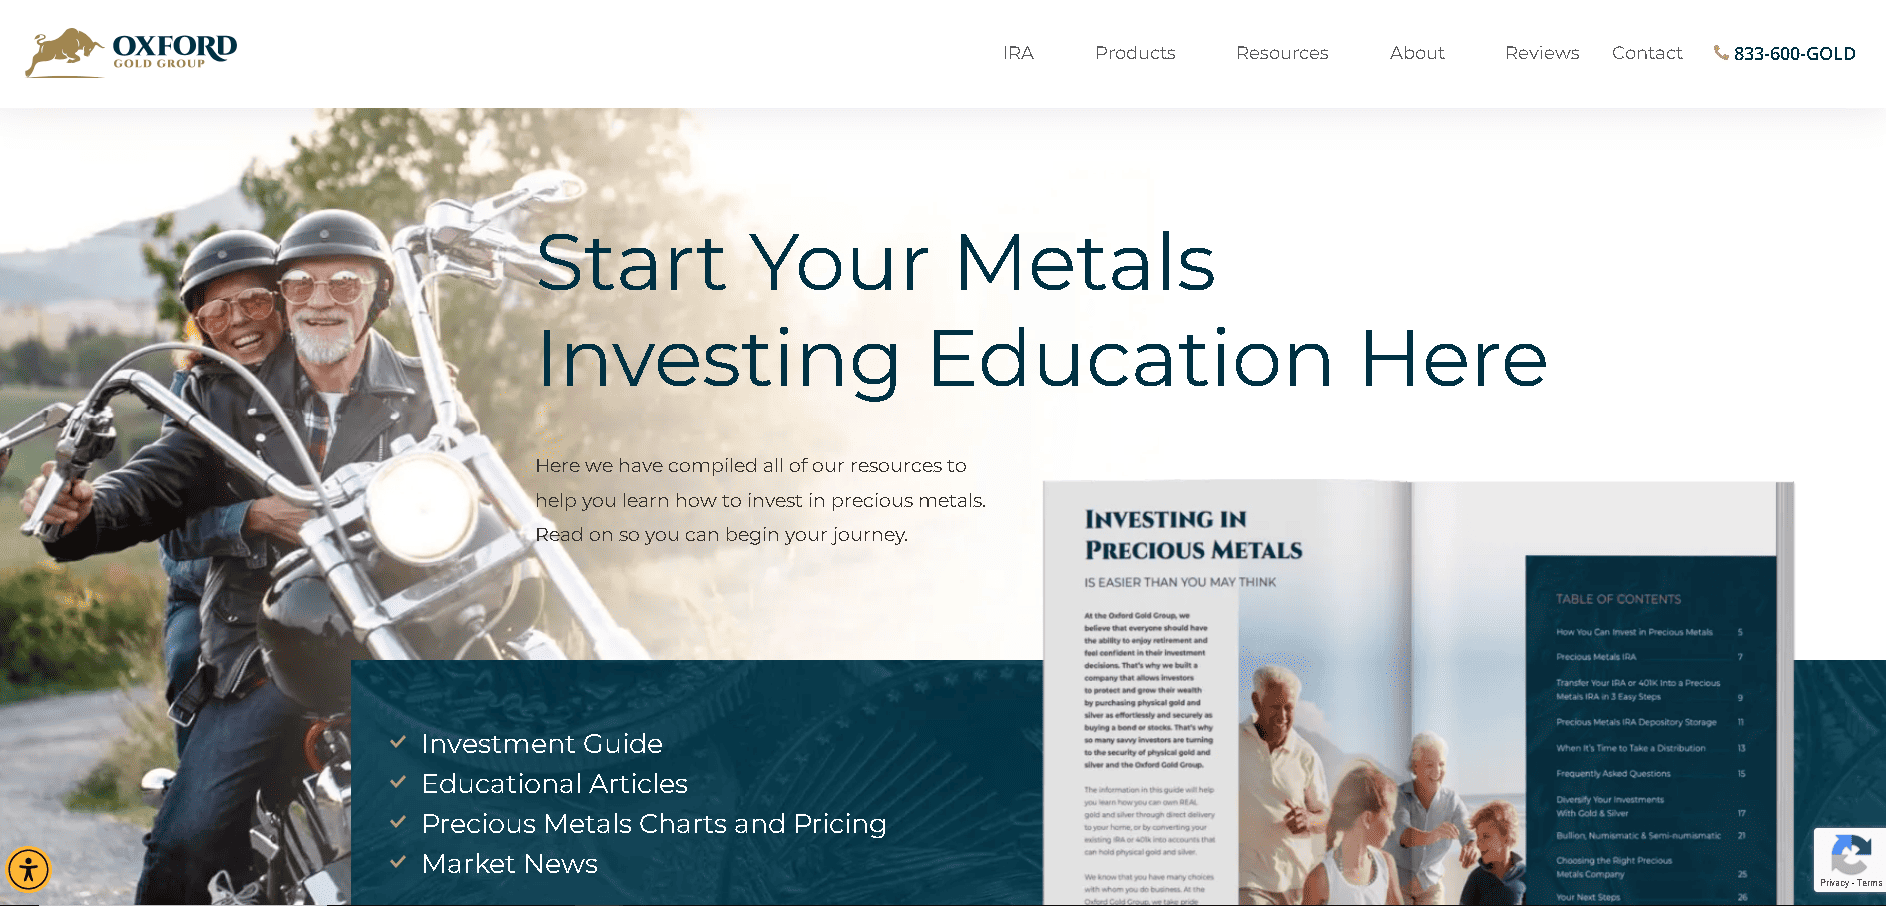 Oxford Gold Group educational resources